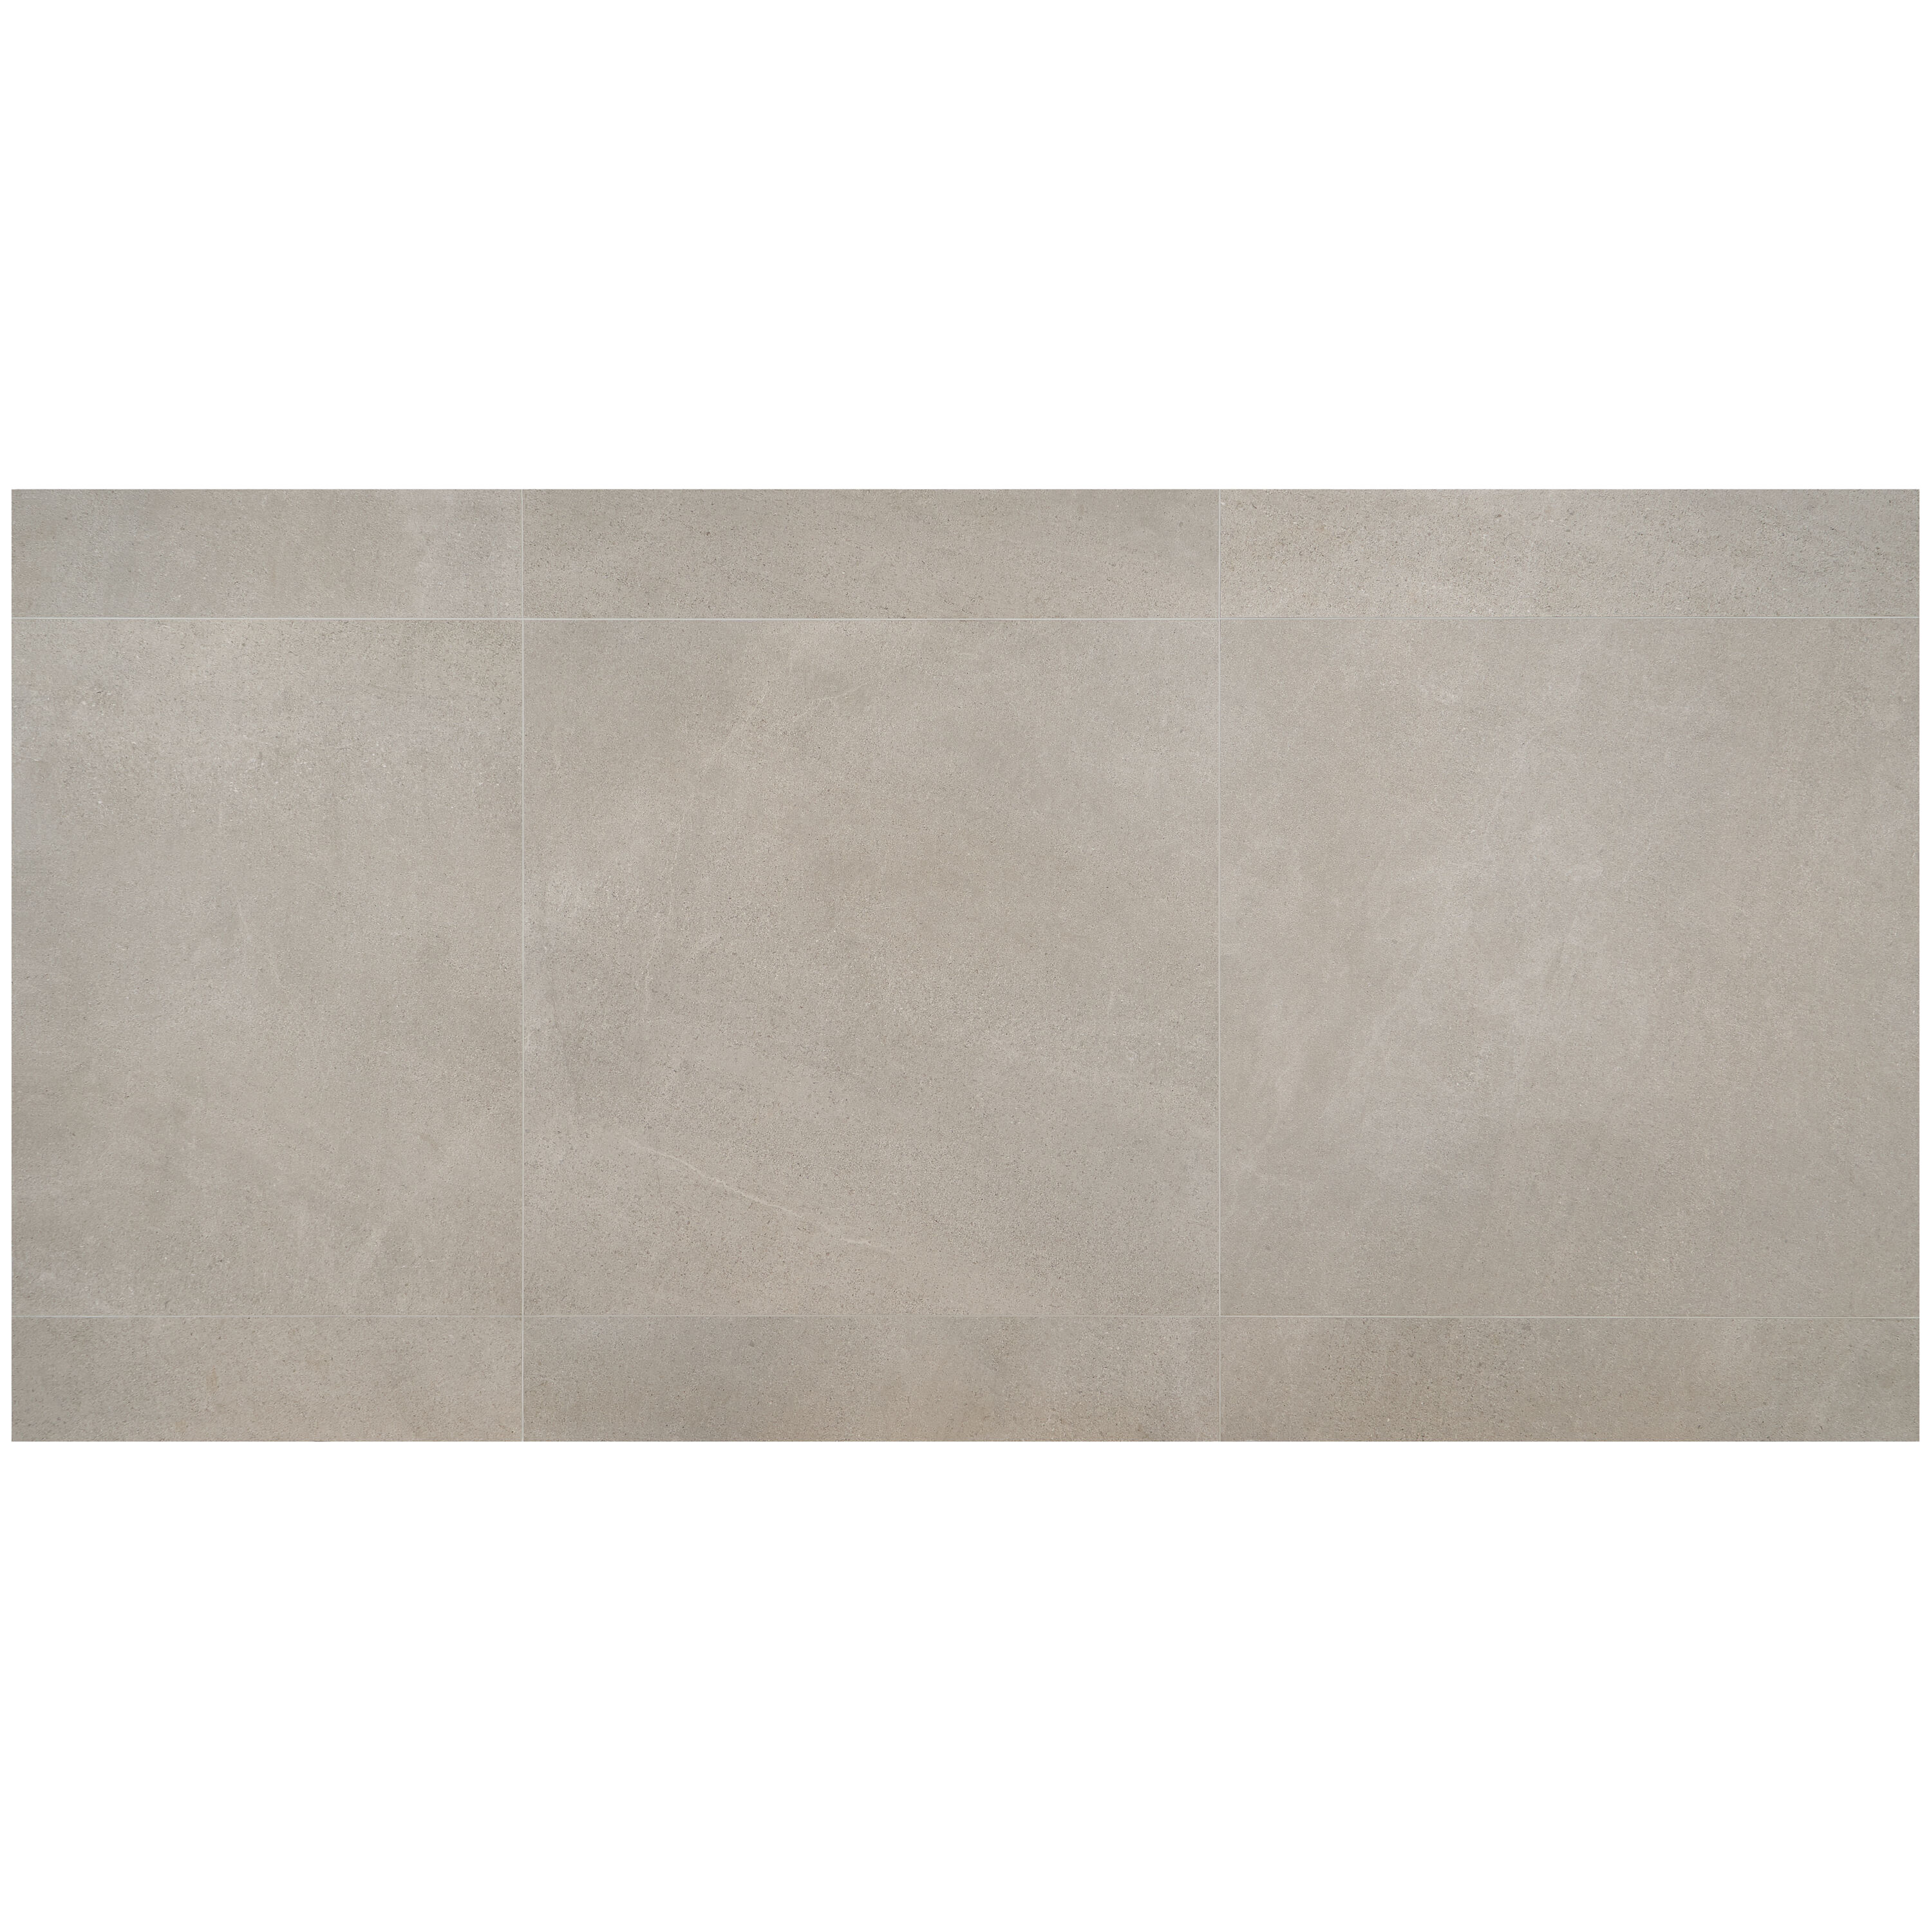 Artmore Tile Lincoln Rock 36-in x 36-in Matte Porcelain Cement Look ...